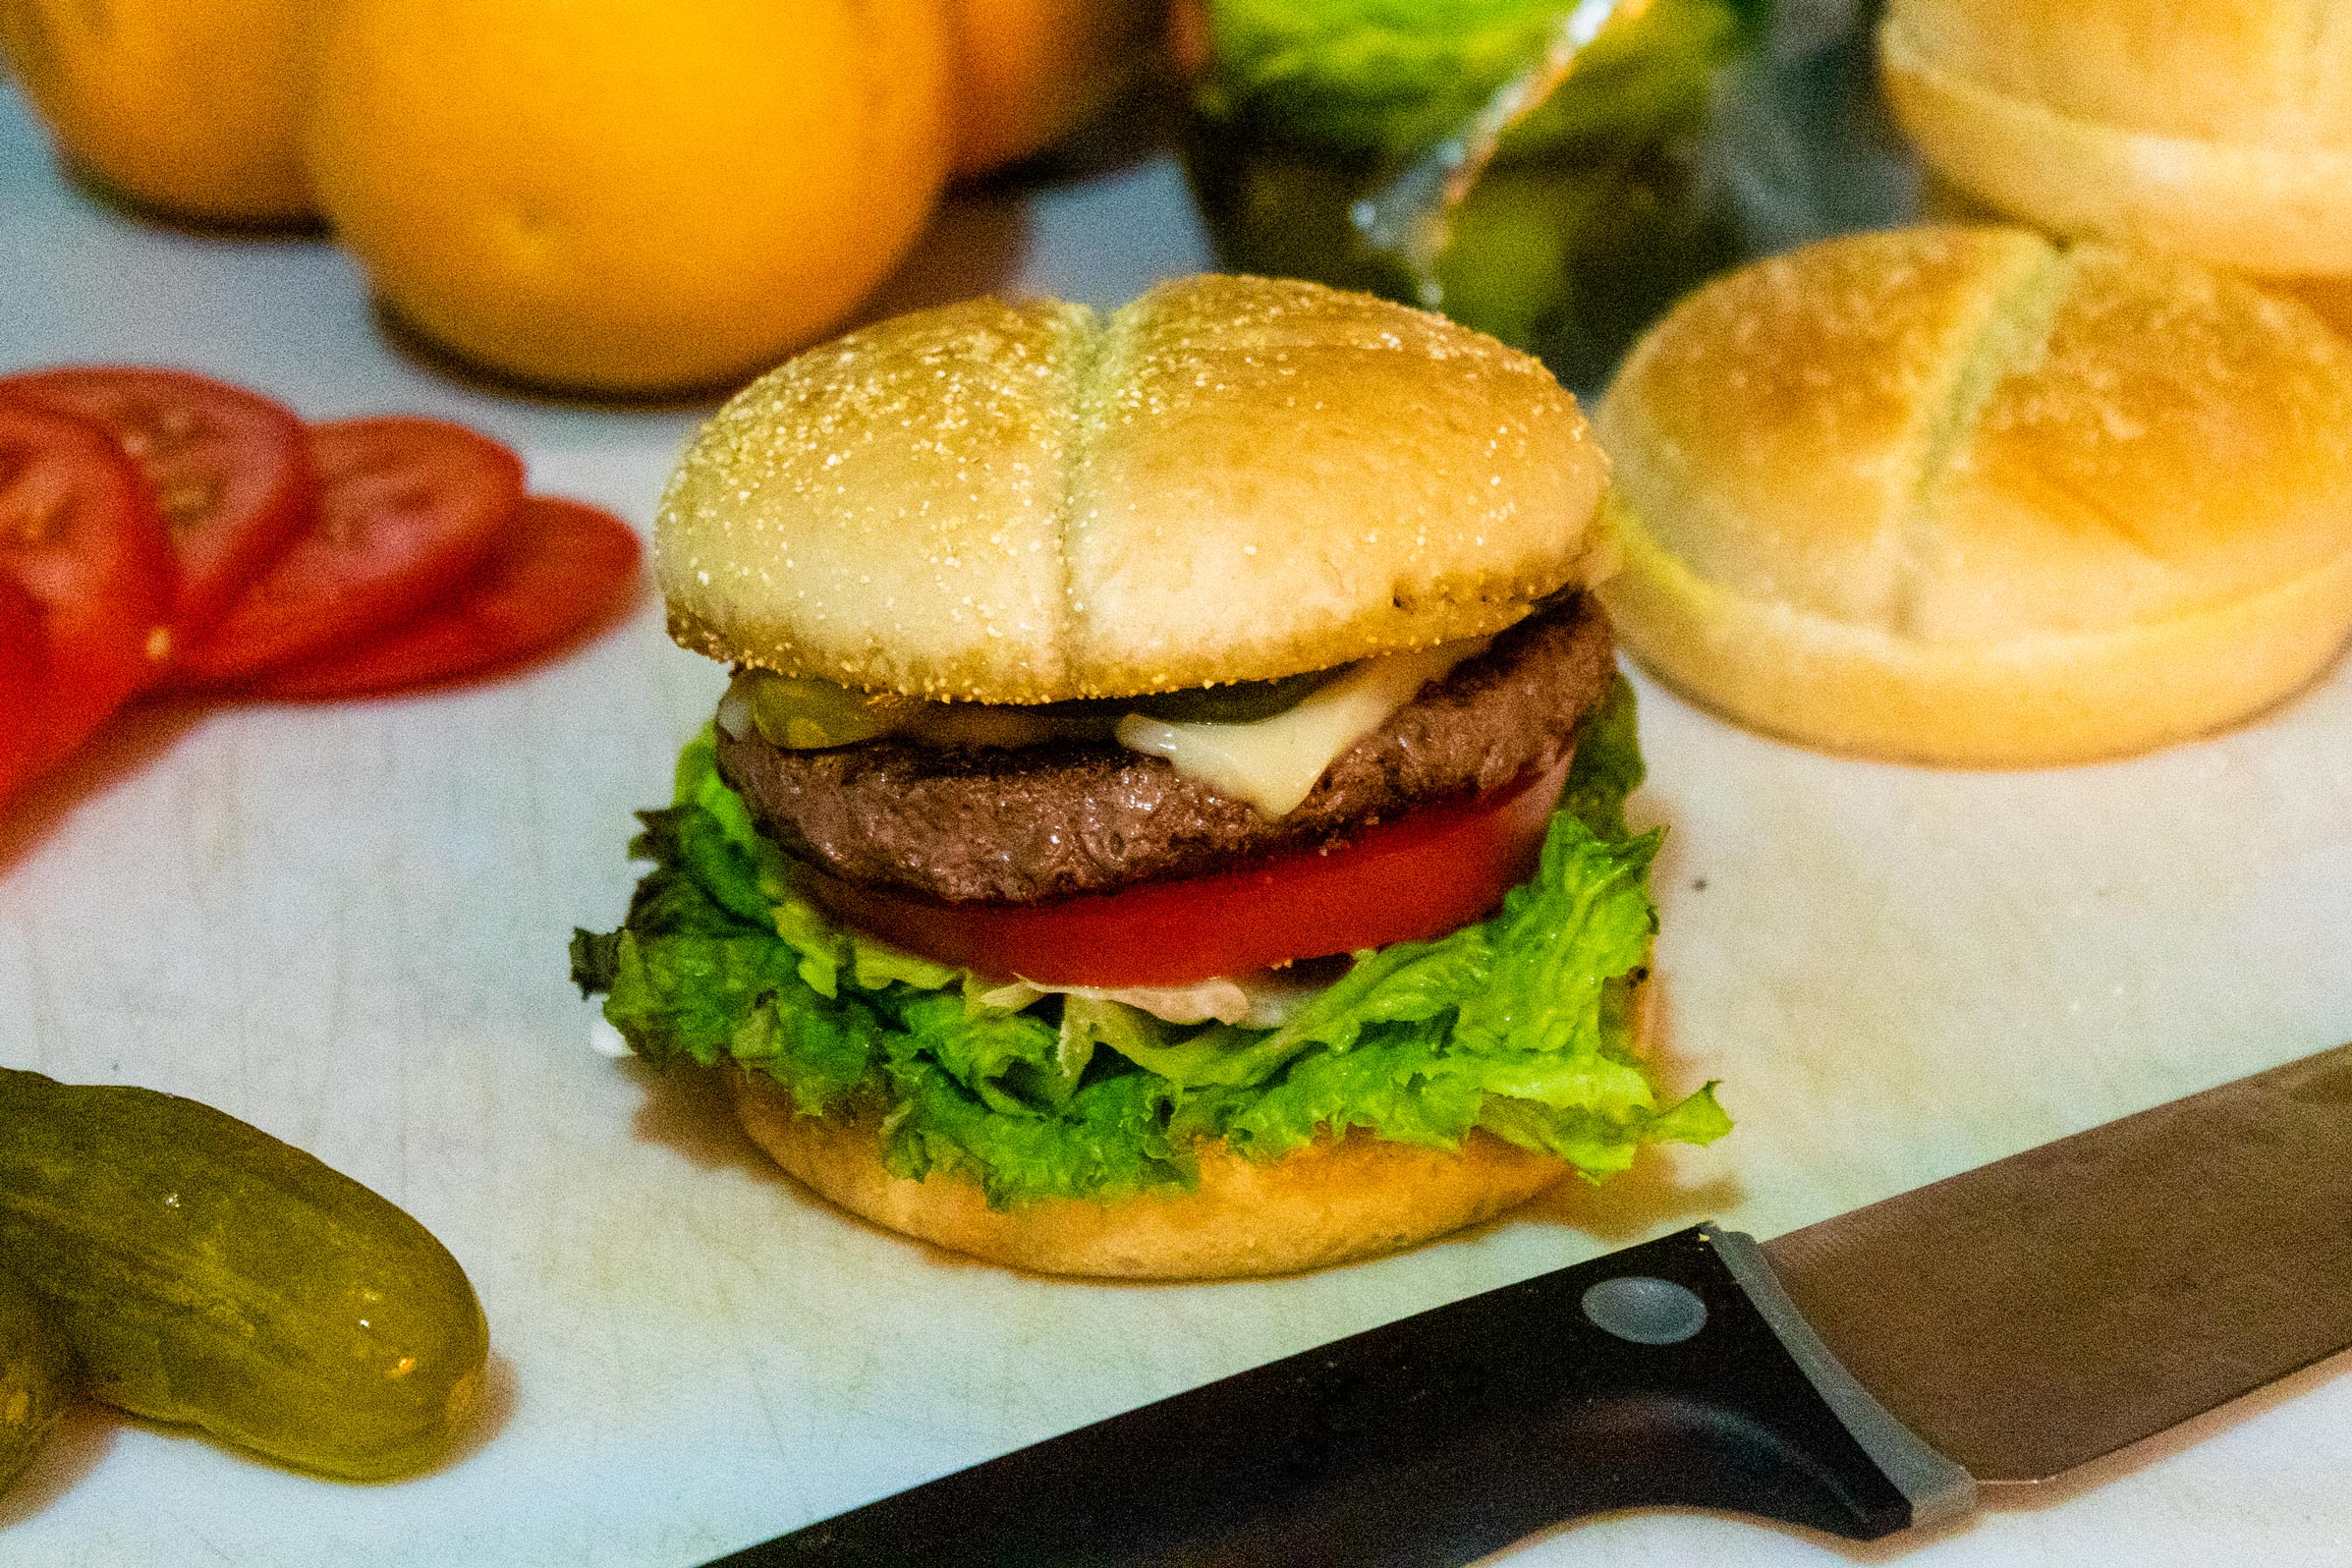 Hamburger with lettuce, tomatoes, cheese, and pickles surrounded by ingredients